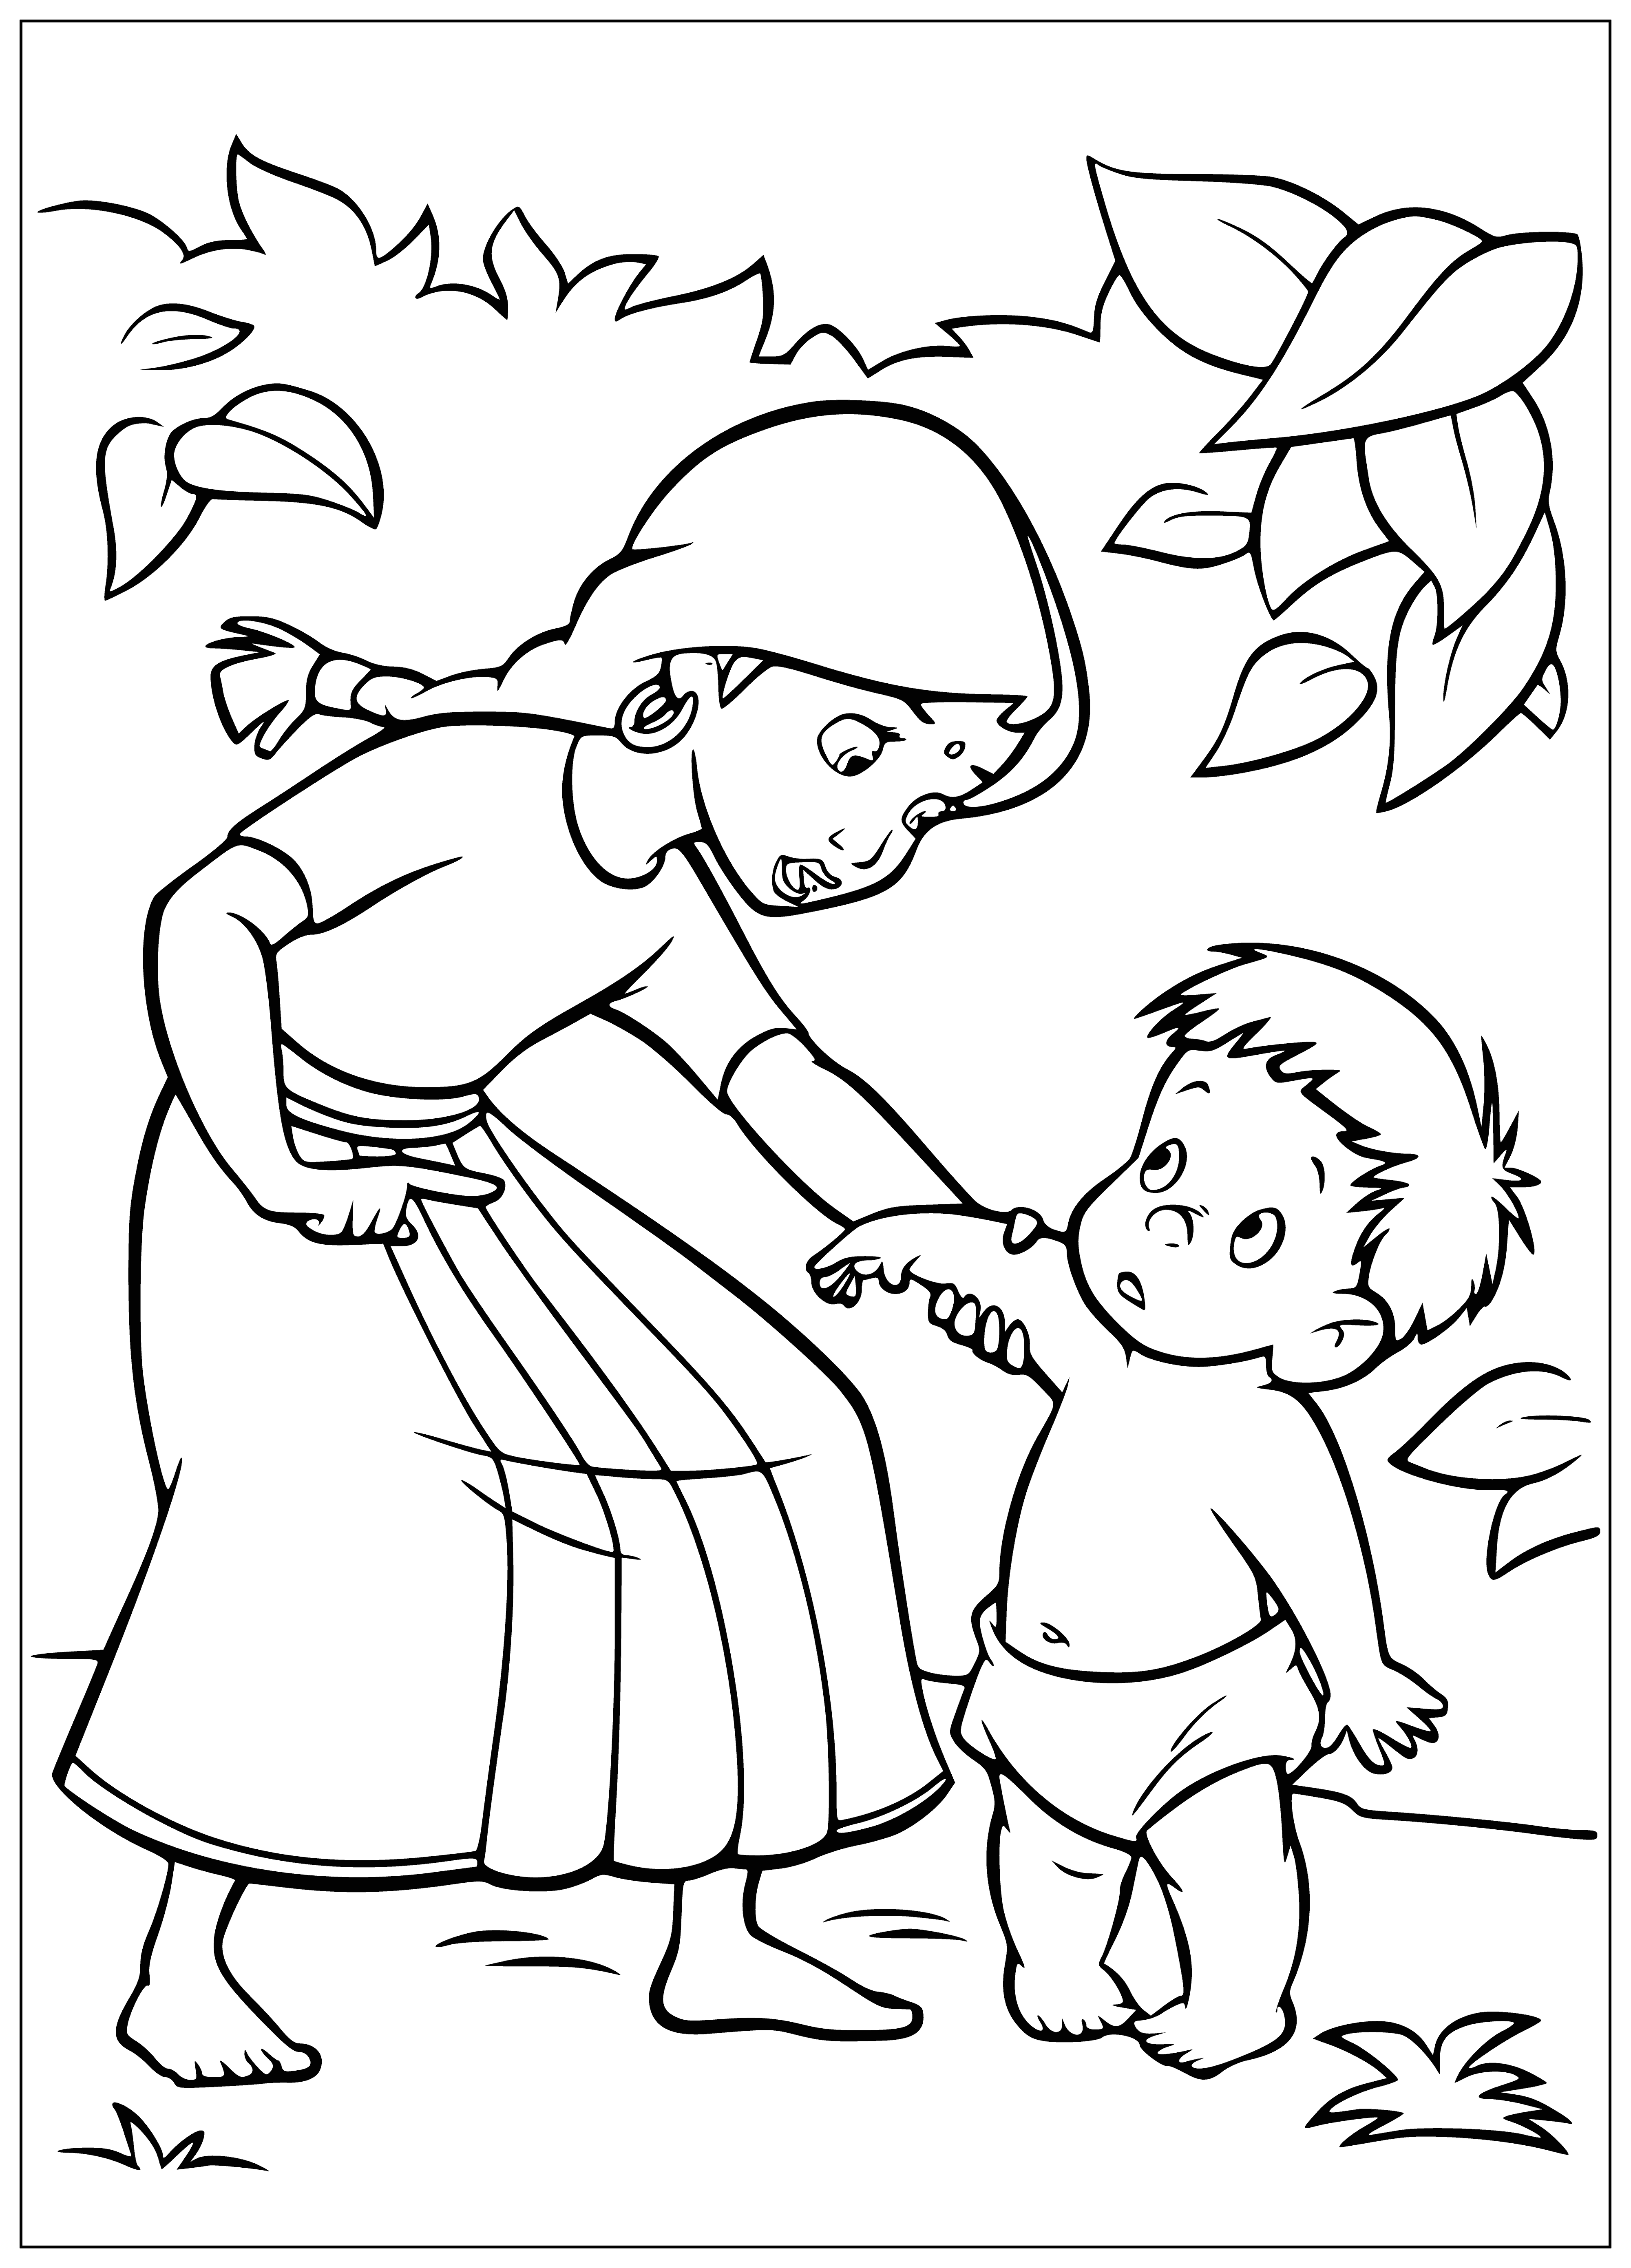 coloring page: Siblings smile on jungle leaf; boy holds stick with small bird perched on it.